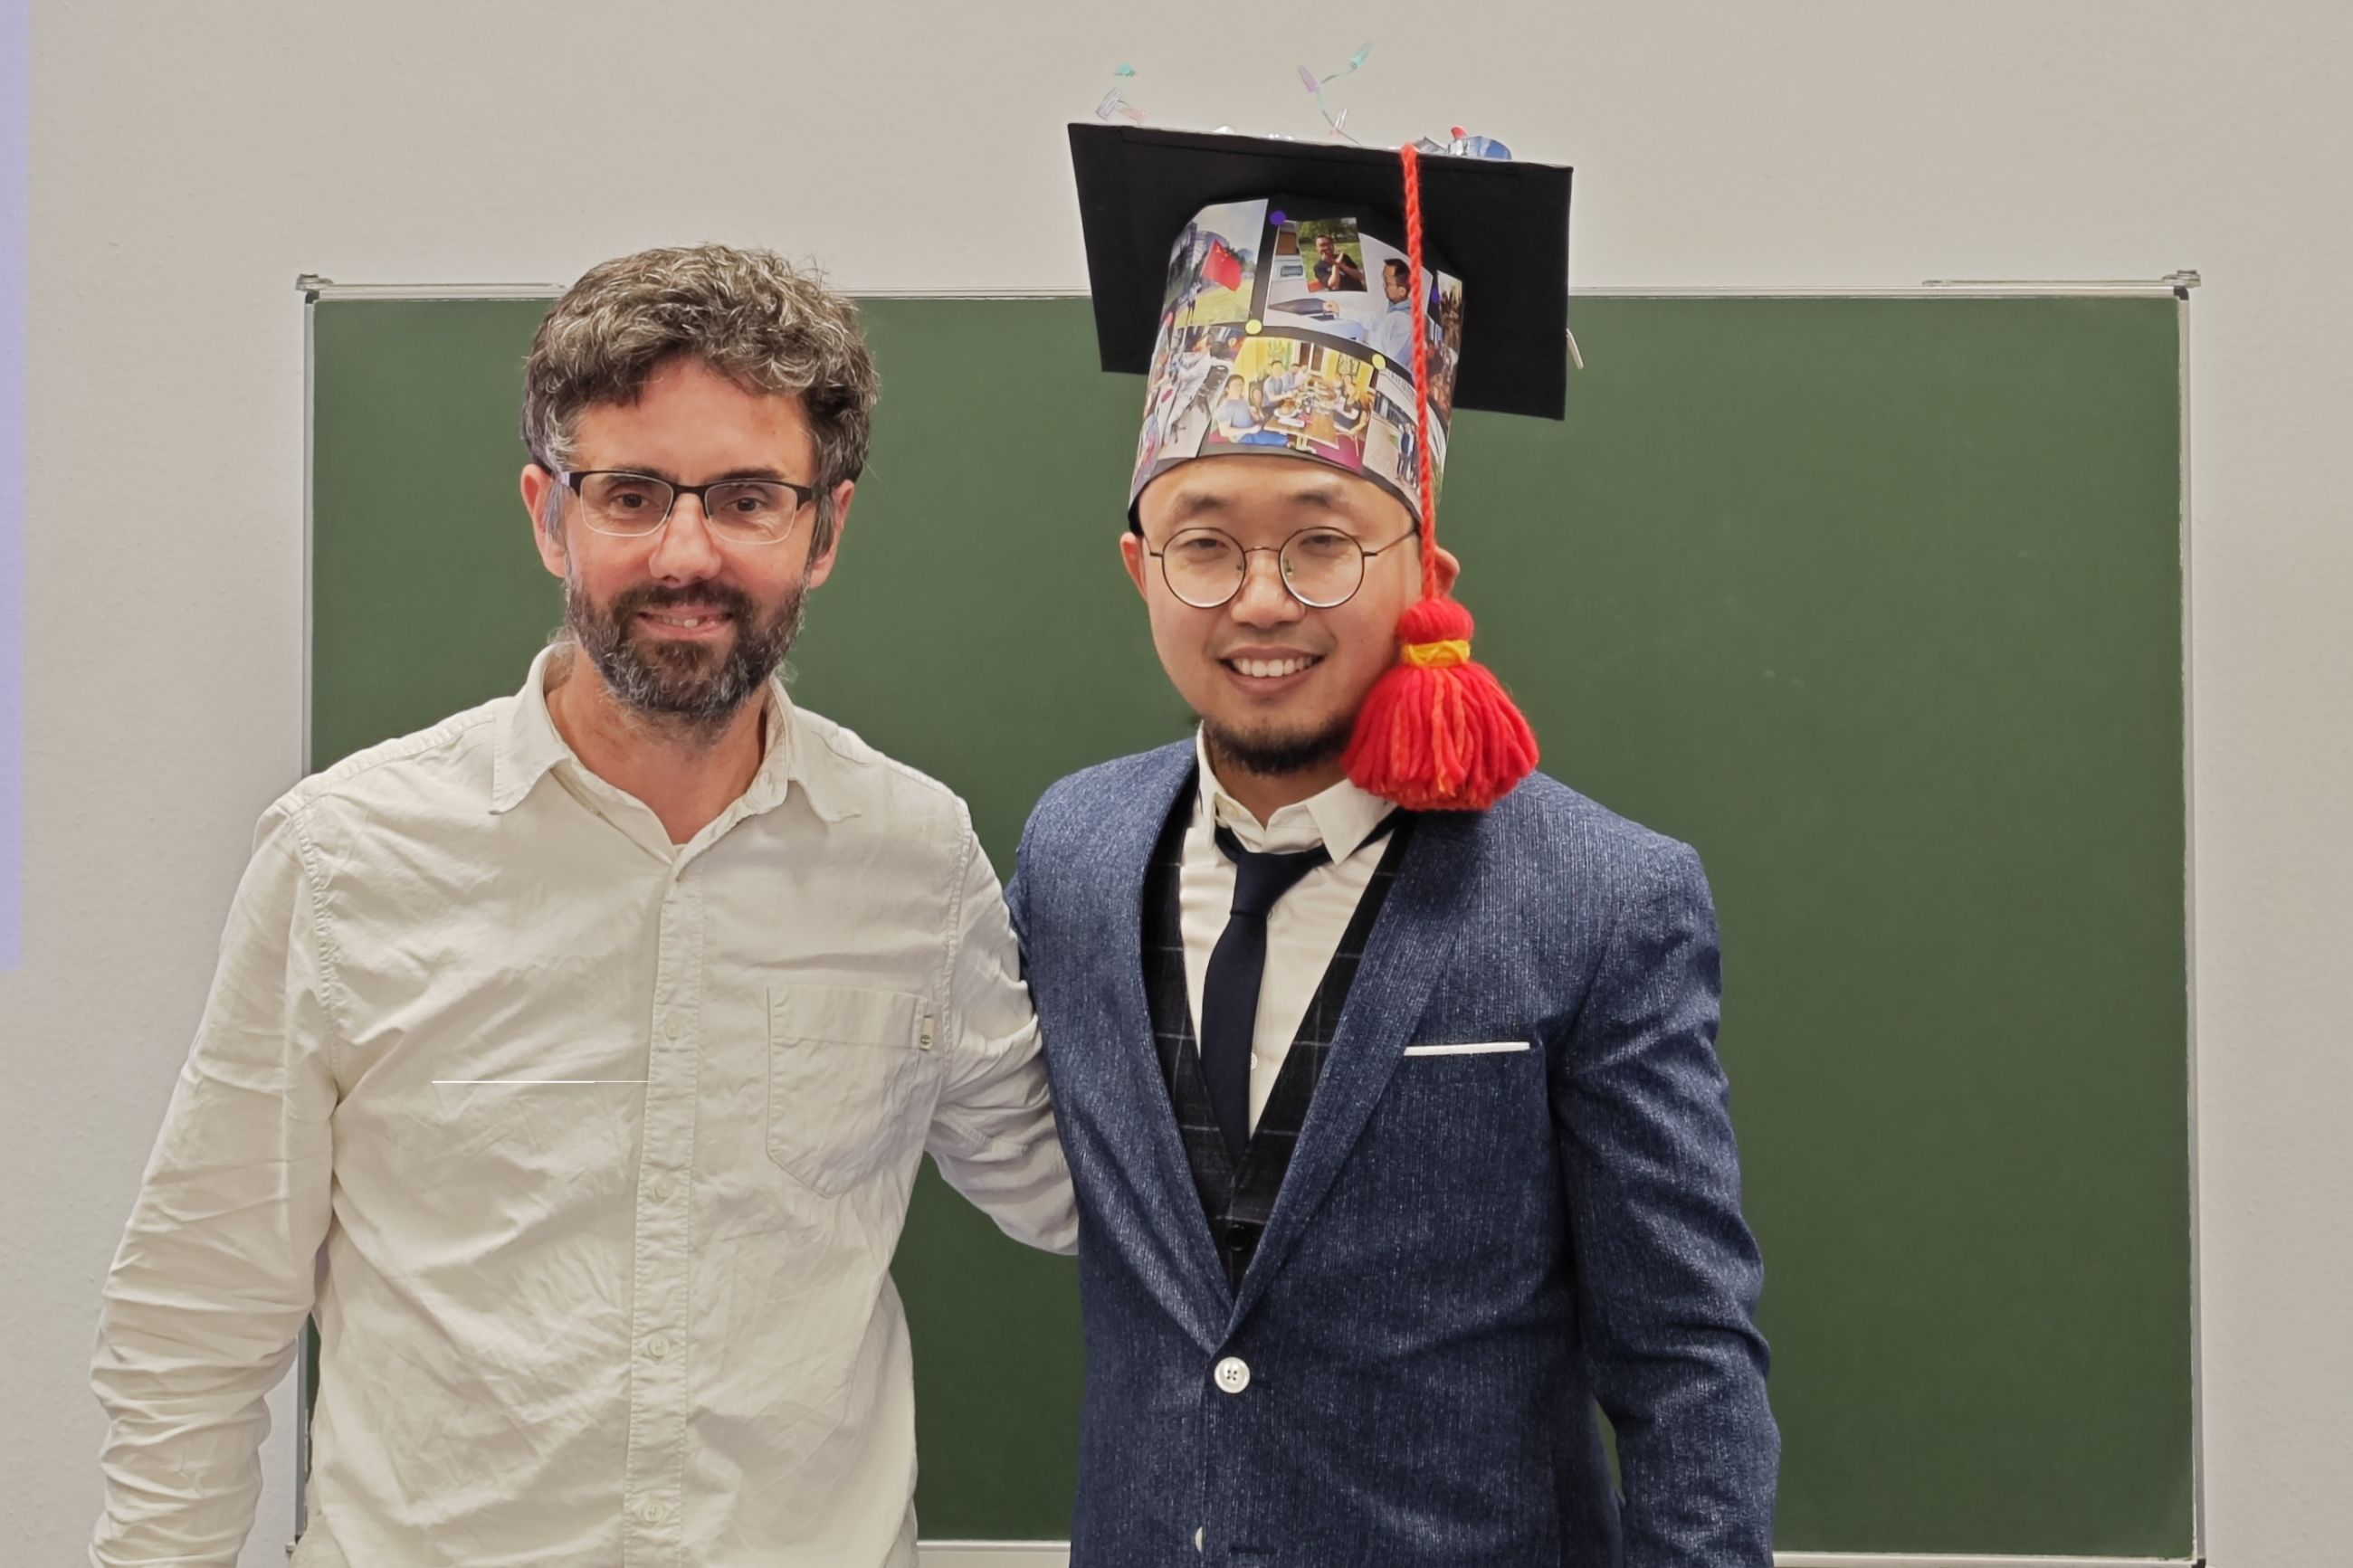 The successful former PhD candidate Dr Peng after his defense (left) with supervisor Wigge. Photo: W. Zeng